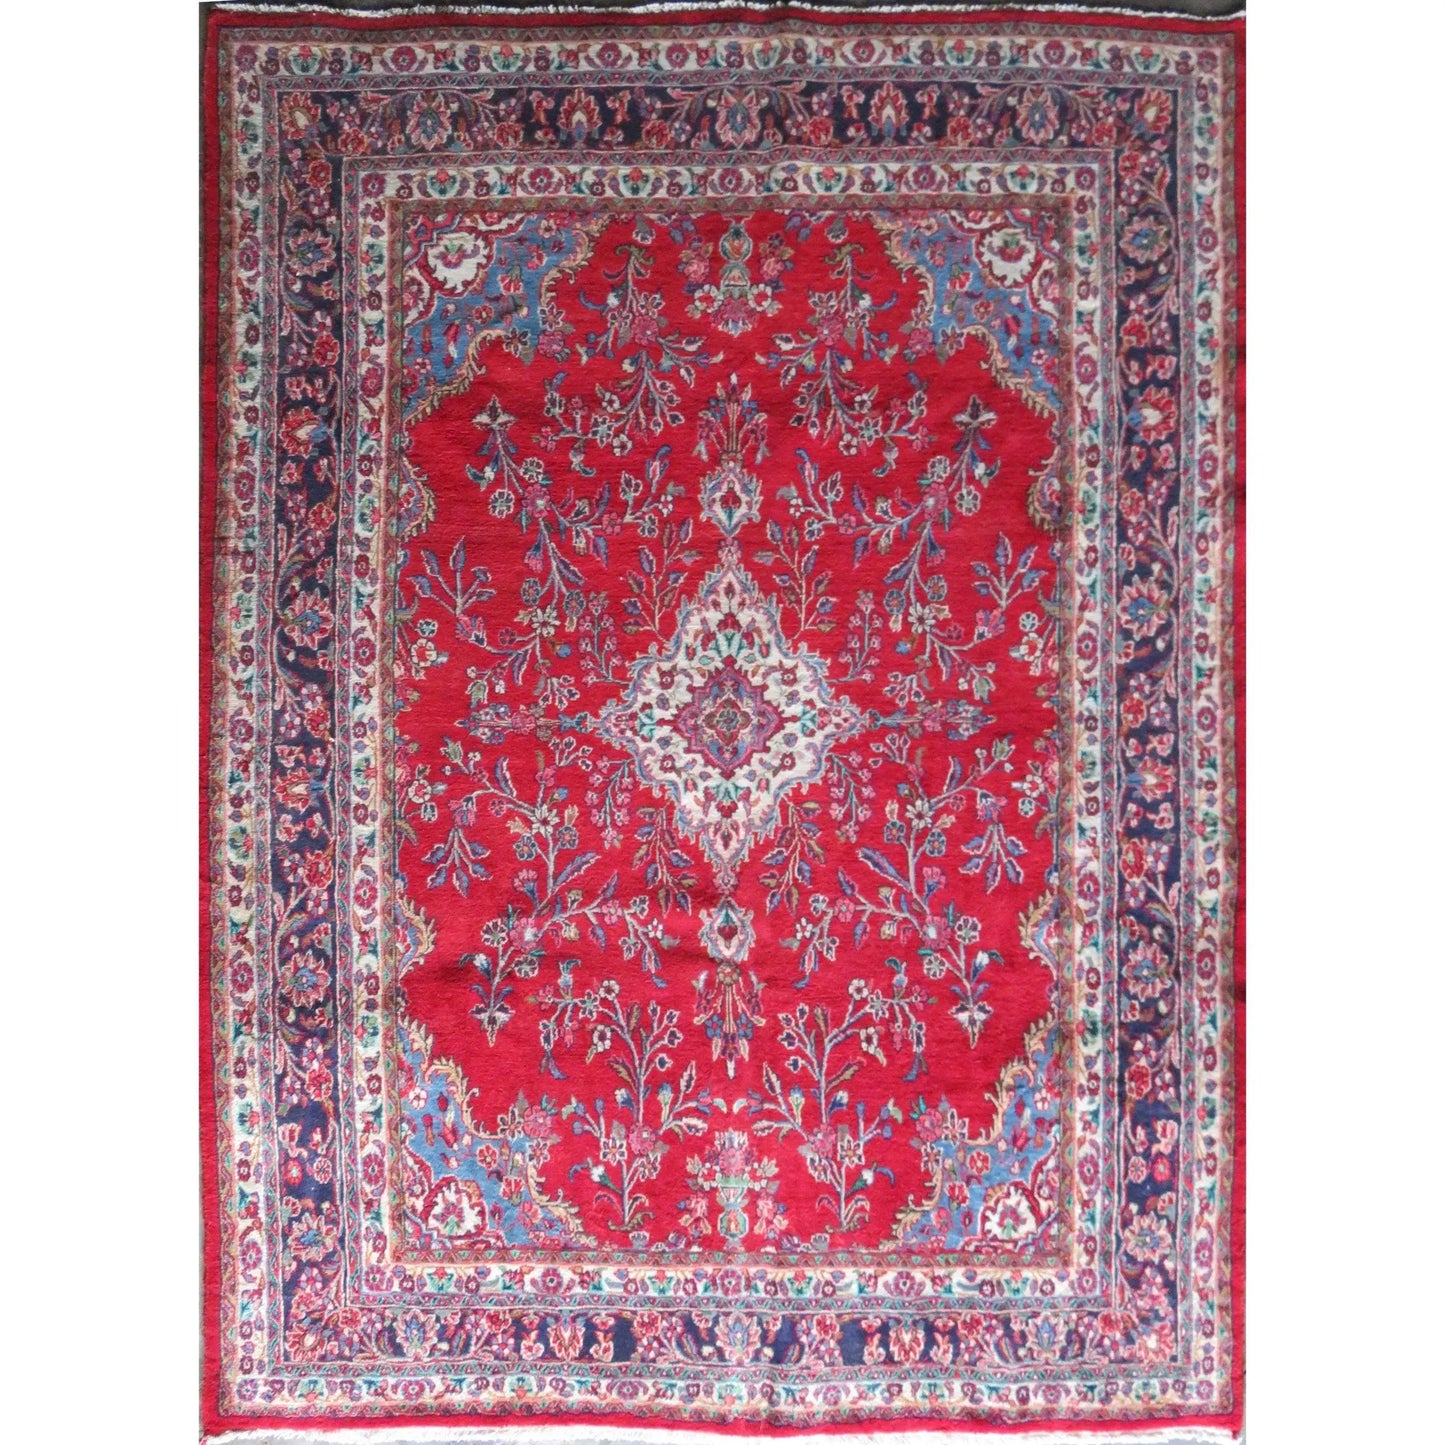 Hand-Knotted Vintage Rug 12'9" x 9'8"